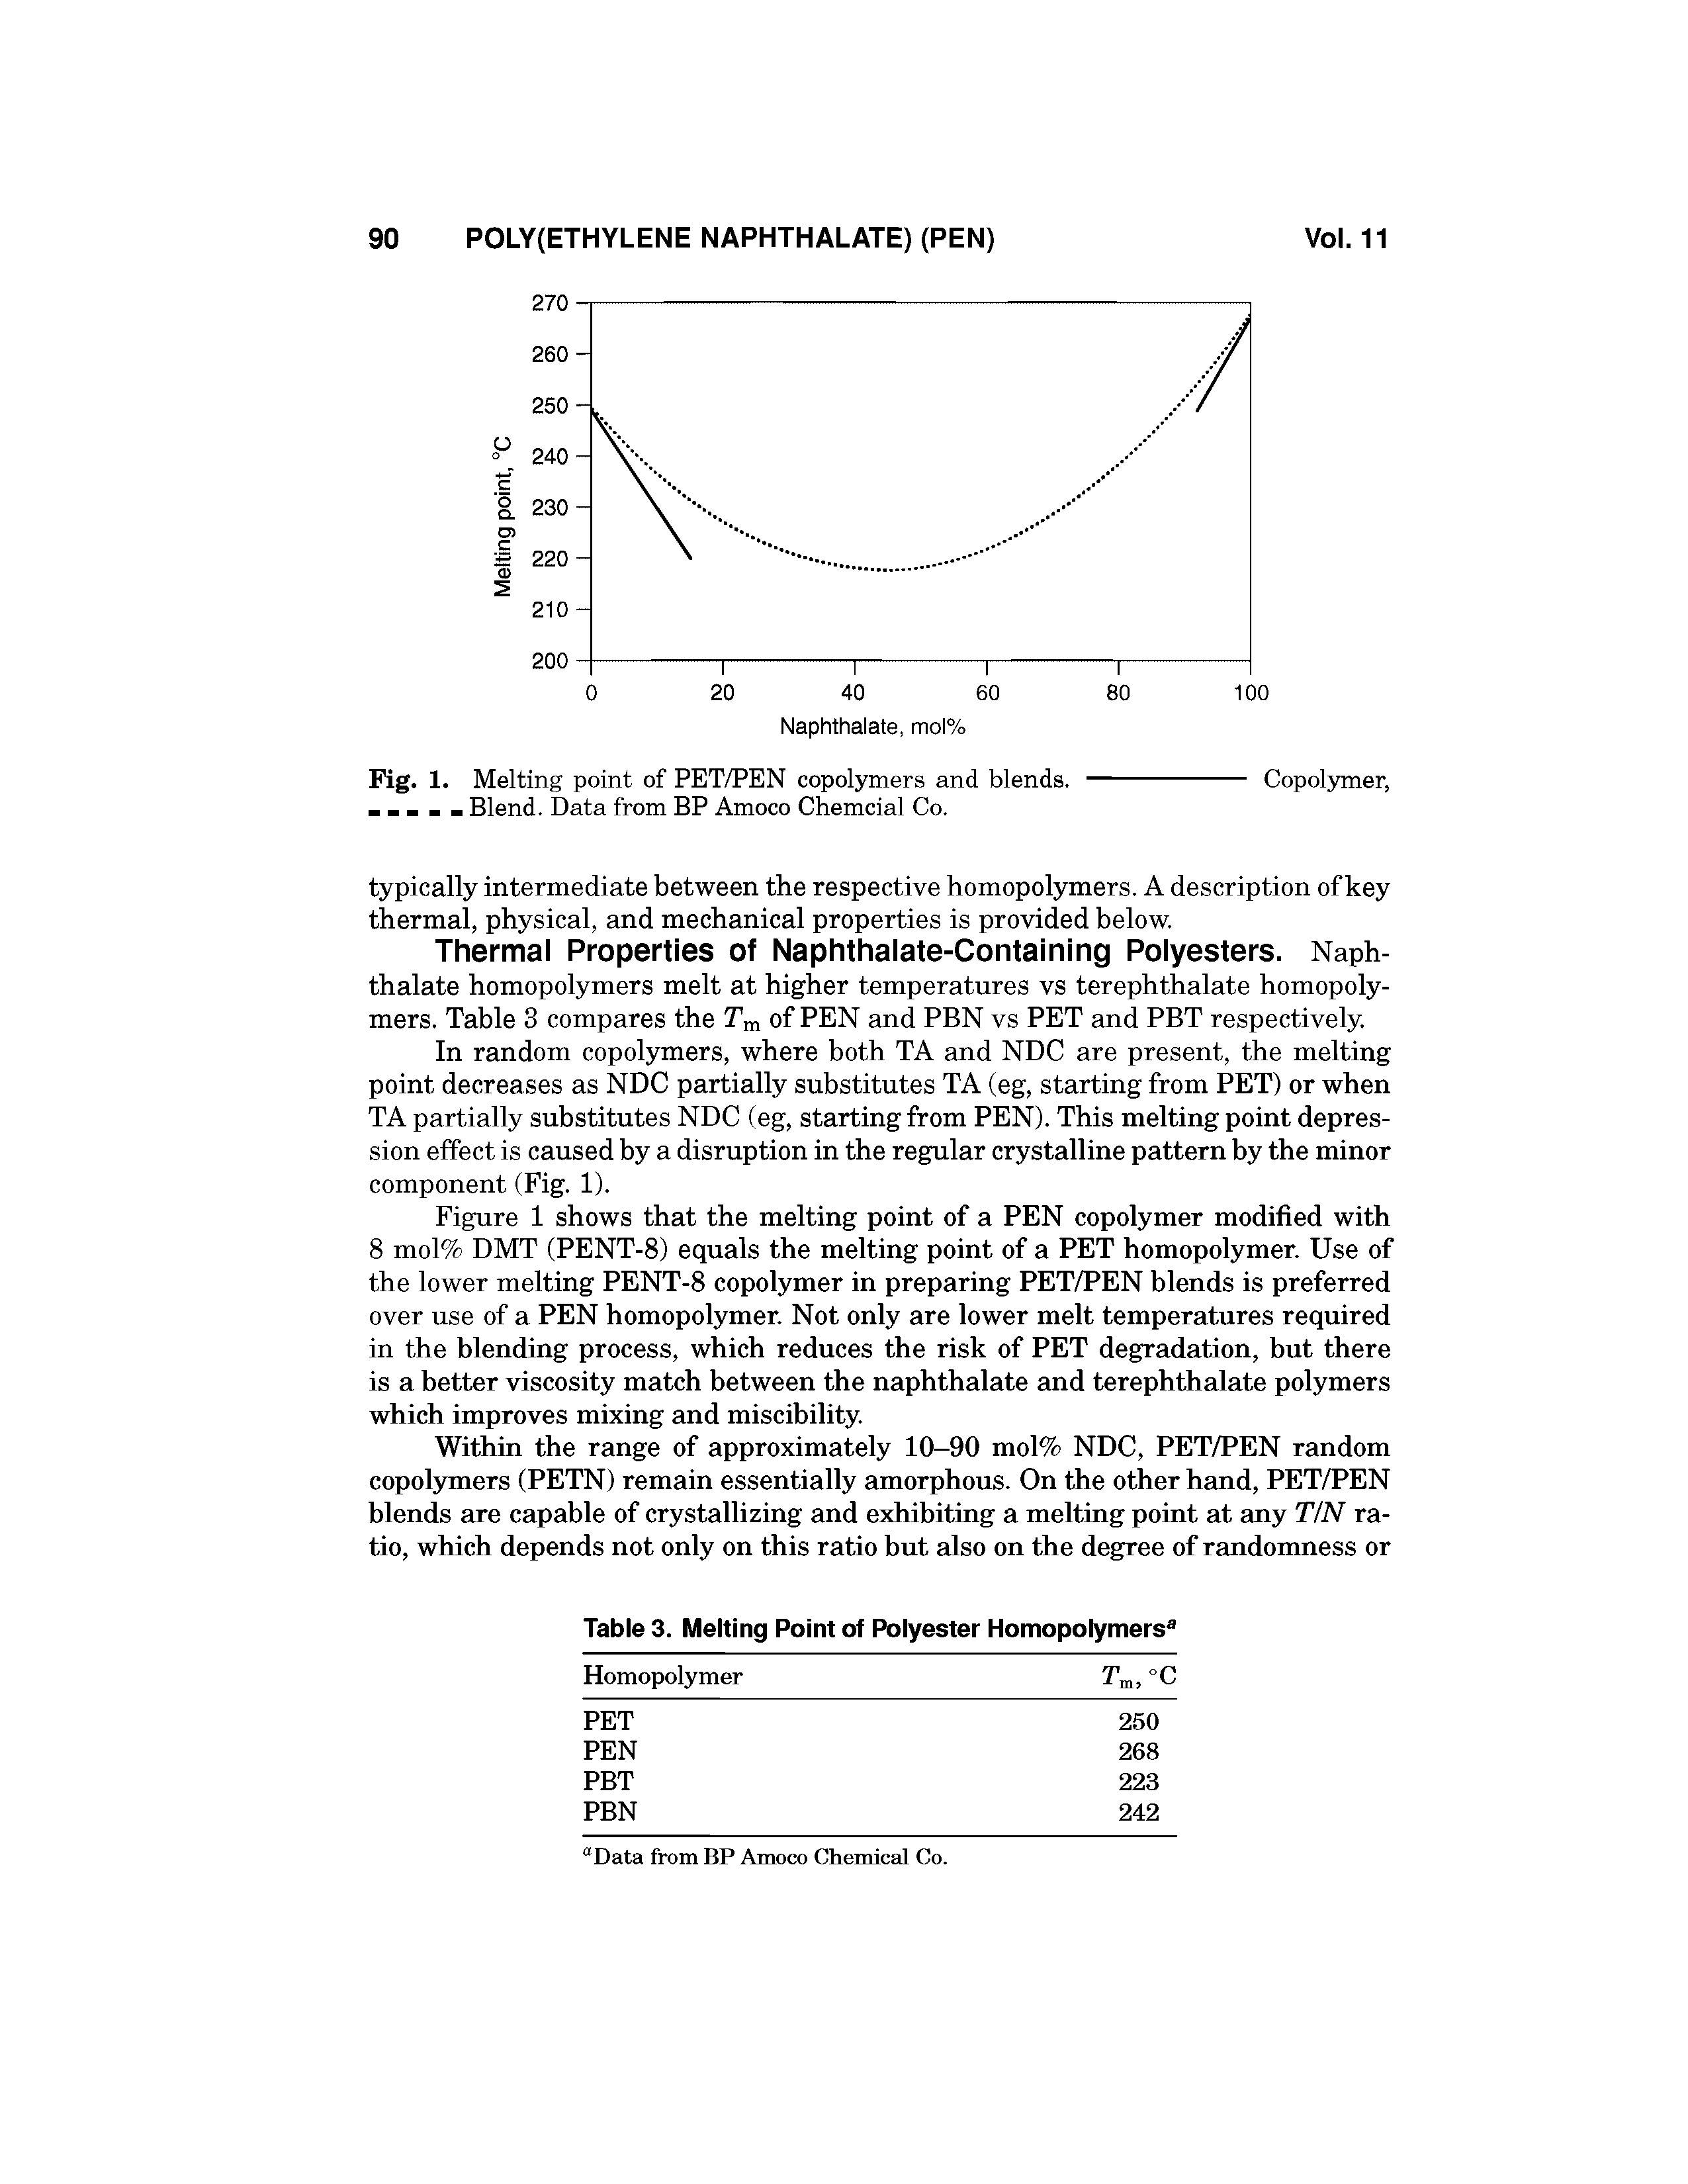 Fig. 1. Melting point of PET/PEN copolymers and blends. Blend. Data from BP Amoco Chemcial Co.